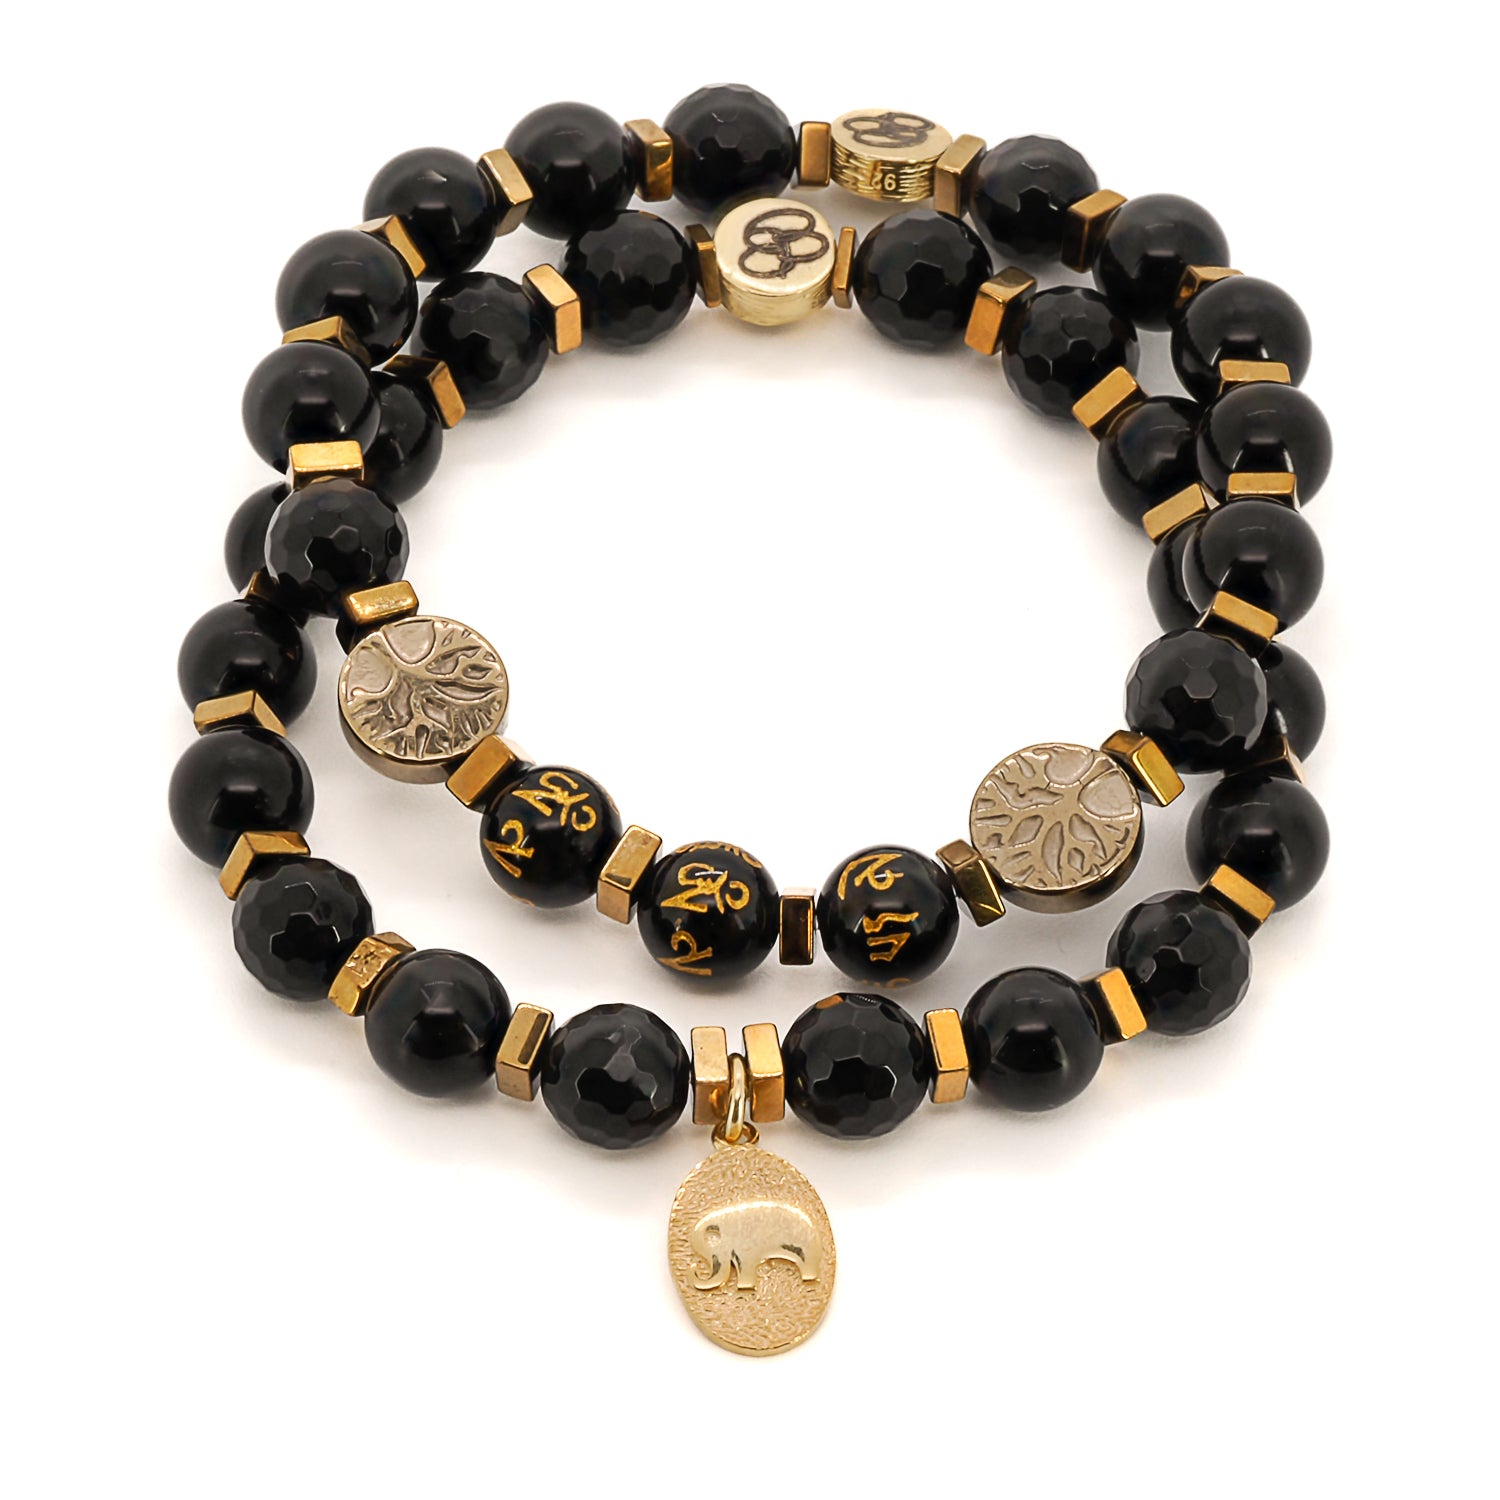 Embrace the mindfulness and spiritual growth with the Onyx Yoga Journey Bracelet Set, featuring onyx stone beads and Om Mani Padme Hum mantra beads.